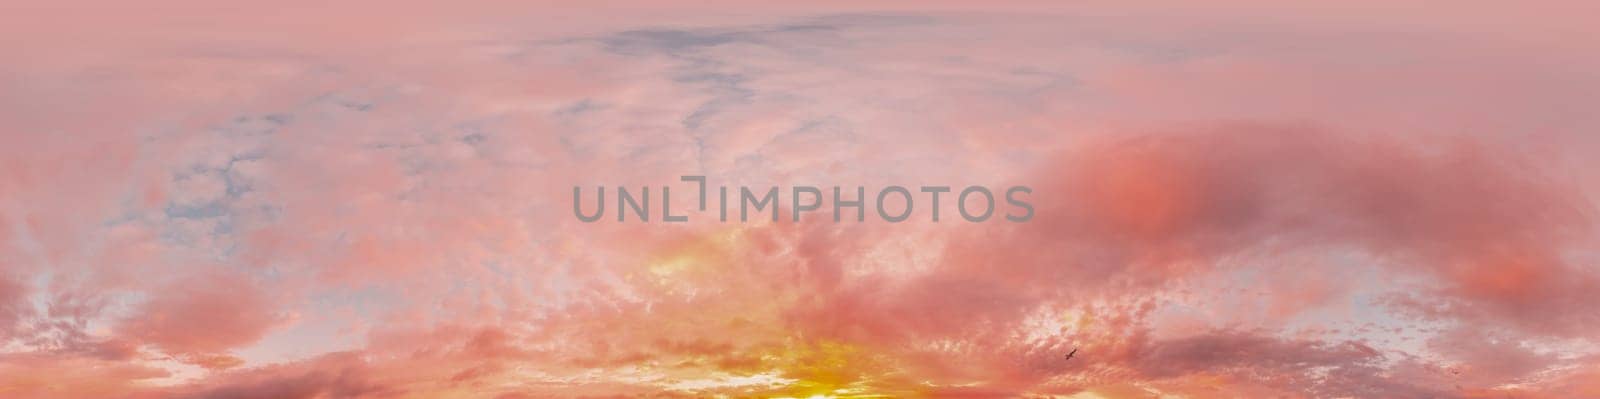 Sunset sky panorama with bright glowing pink Cirrus clouds. HDR 360 seamless spherical panorama. Full zenith or sky dome in 3D, sky replacement for aerial drone panoramas. Climate and weather change. by Matiunina